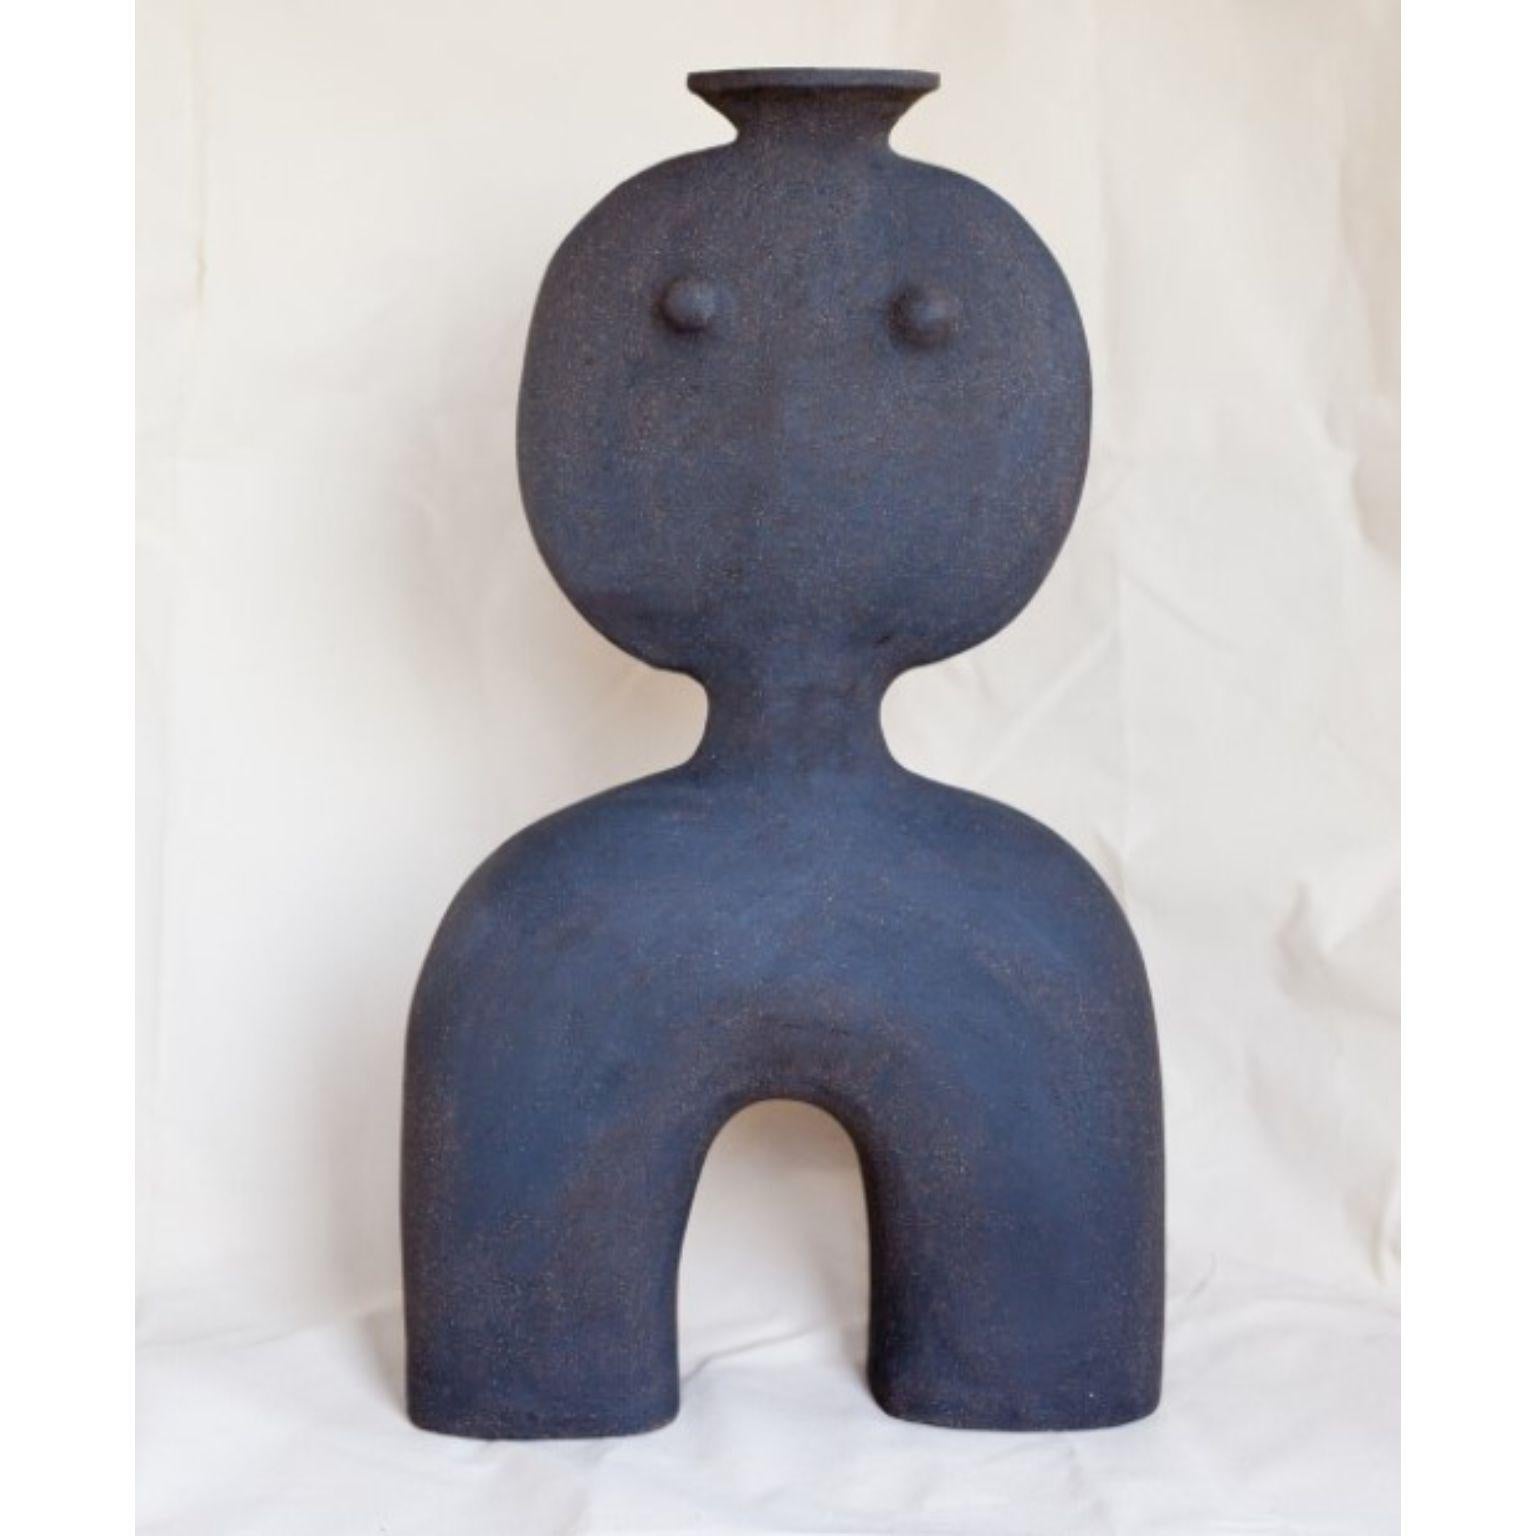 Haniwa Warrior 15 sculpture by Noe Kuremoto
Materials: Black stoneware sculpture
Dimensions: D11 x W33 x H57.5 cm 

My interpretation of ancient clay figurine Haniwa.*
For years I was afraid to become an artist.
Afraid to voice my honest view of the